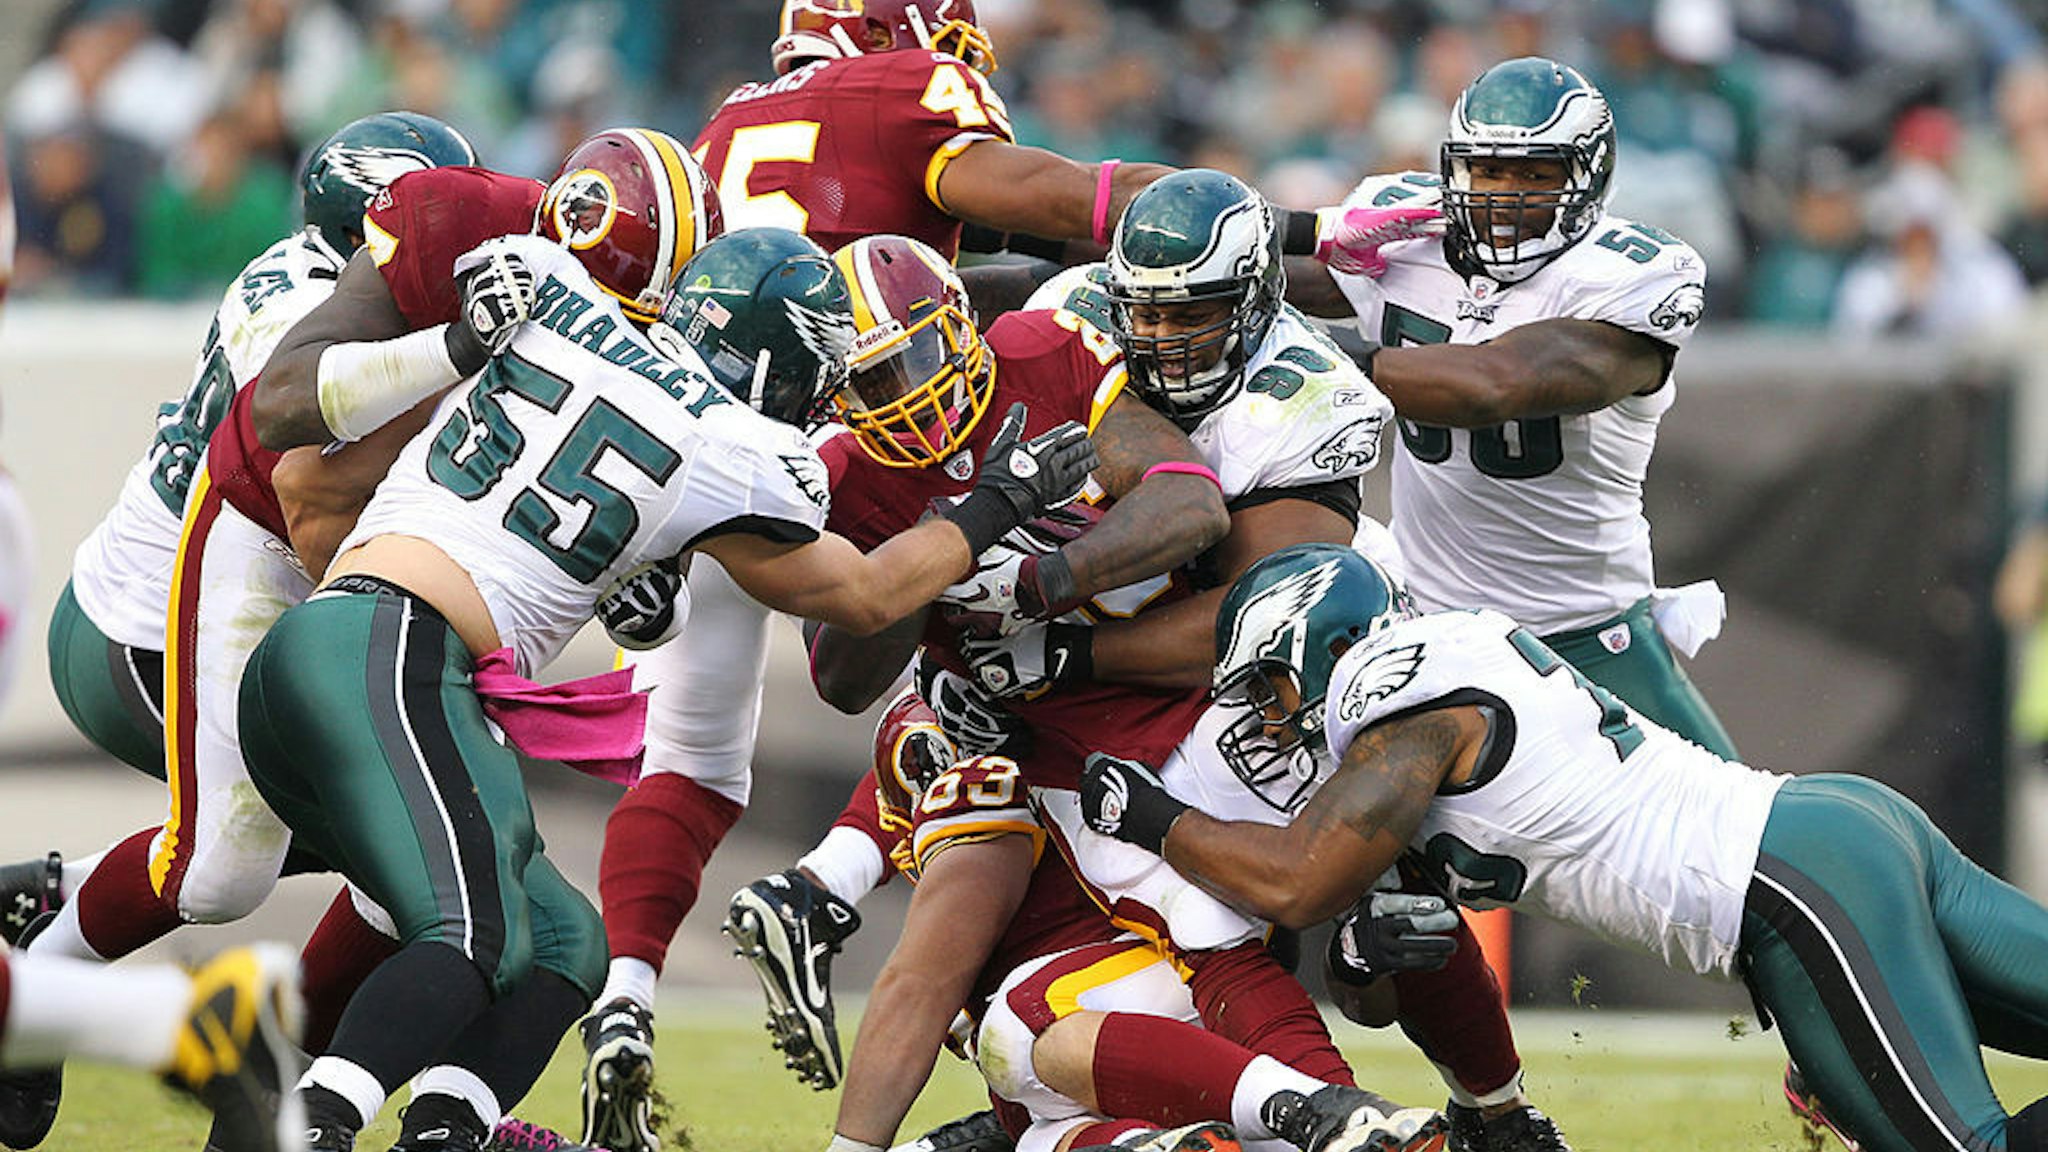 The Philadelphia Eagles during a game against the Washington Redskins on October 3, 2010 at Lincoln Financial Field in Philadelphia, Pennsylvania.